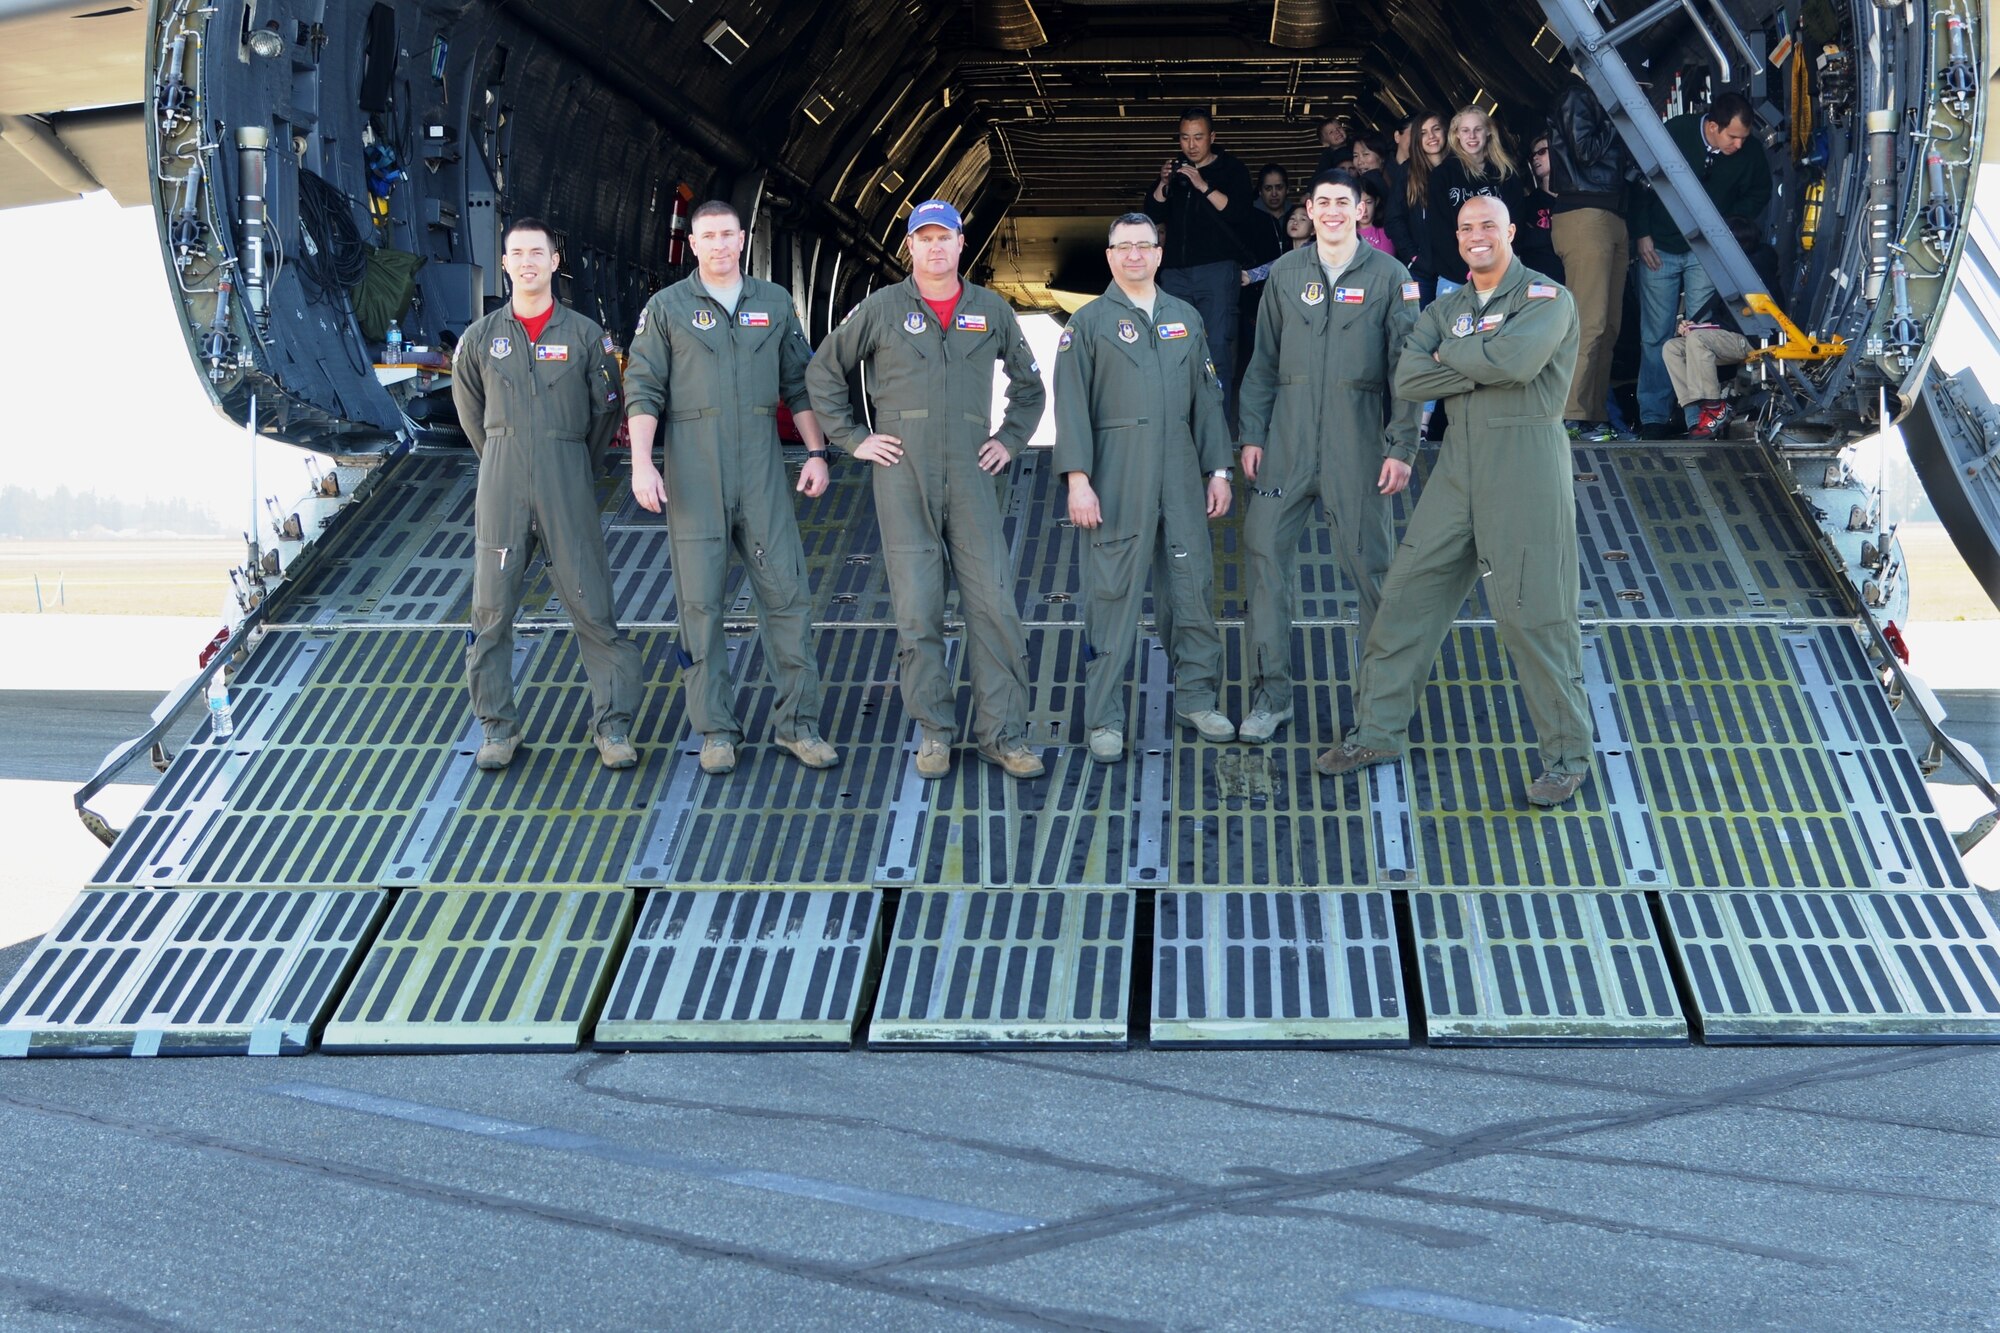 First shift of the aircrew at the “Sky’s the limit-Girls fly too” Airshow at the Abbotsford International Airport’s in British Columbia, Canada. The airport celebrated a week of International Women’s Day, March 10-11, 2018. (U.S. Air Force photo by Ms. Minnie Jones)